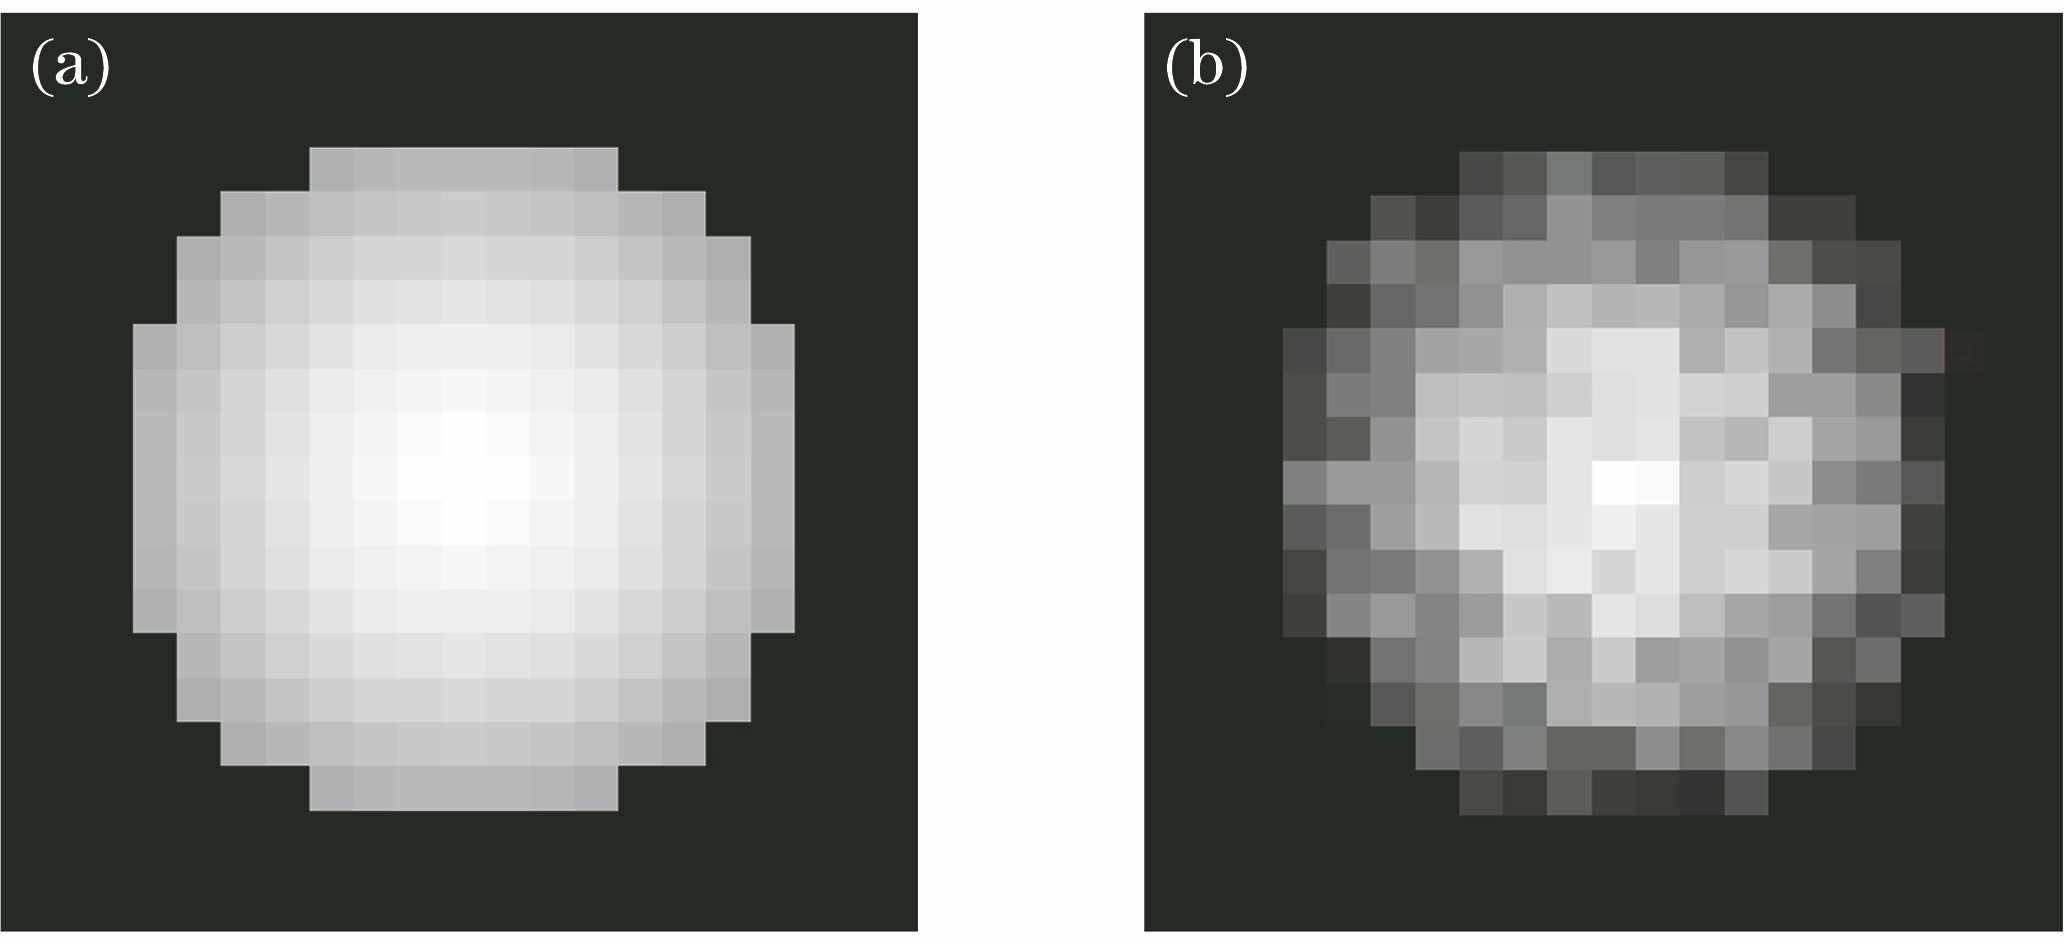 Simulated spot images. (a) Ideal simulated spot; (b) simulated spot with 15% random noise